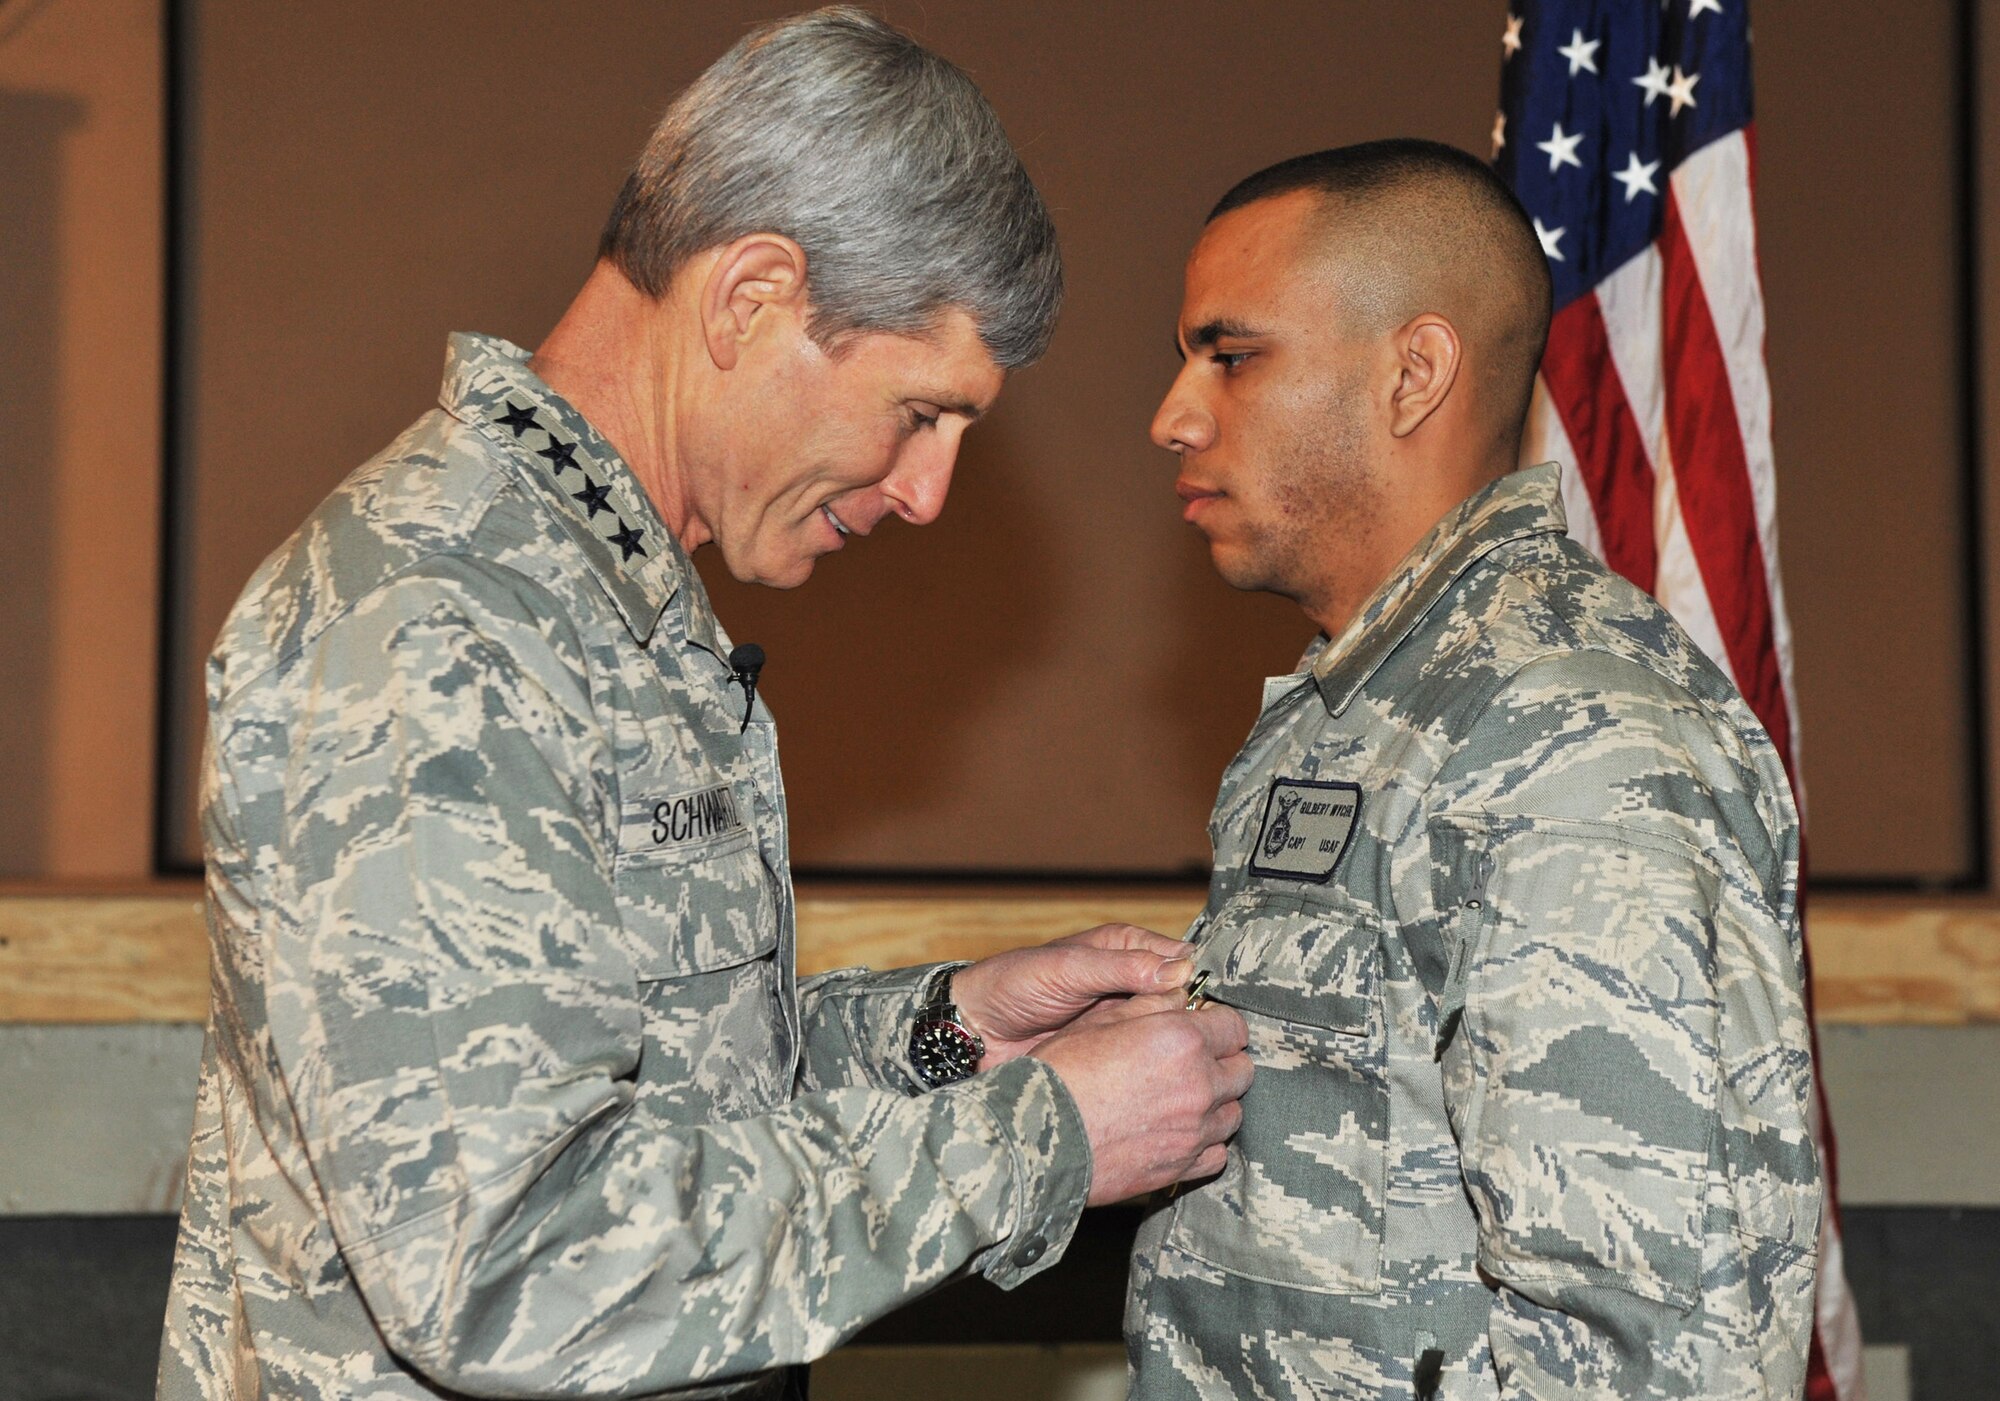 Air Force Chief of Staff Gen. Norton Schwartz pins a Purple Heart medal on Capt. Gil Wyche, a security forces officer assigned to the 966th Air Expeditionary Squadron, during a ceremony at Bagram Airfield, Afghanistan, on Jan. 19, 2011. (U.S. Air Force photo/Senior Airman Shelia deVera)